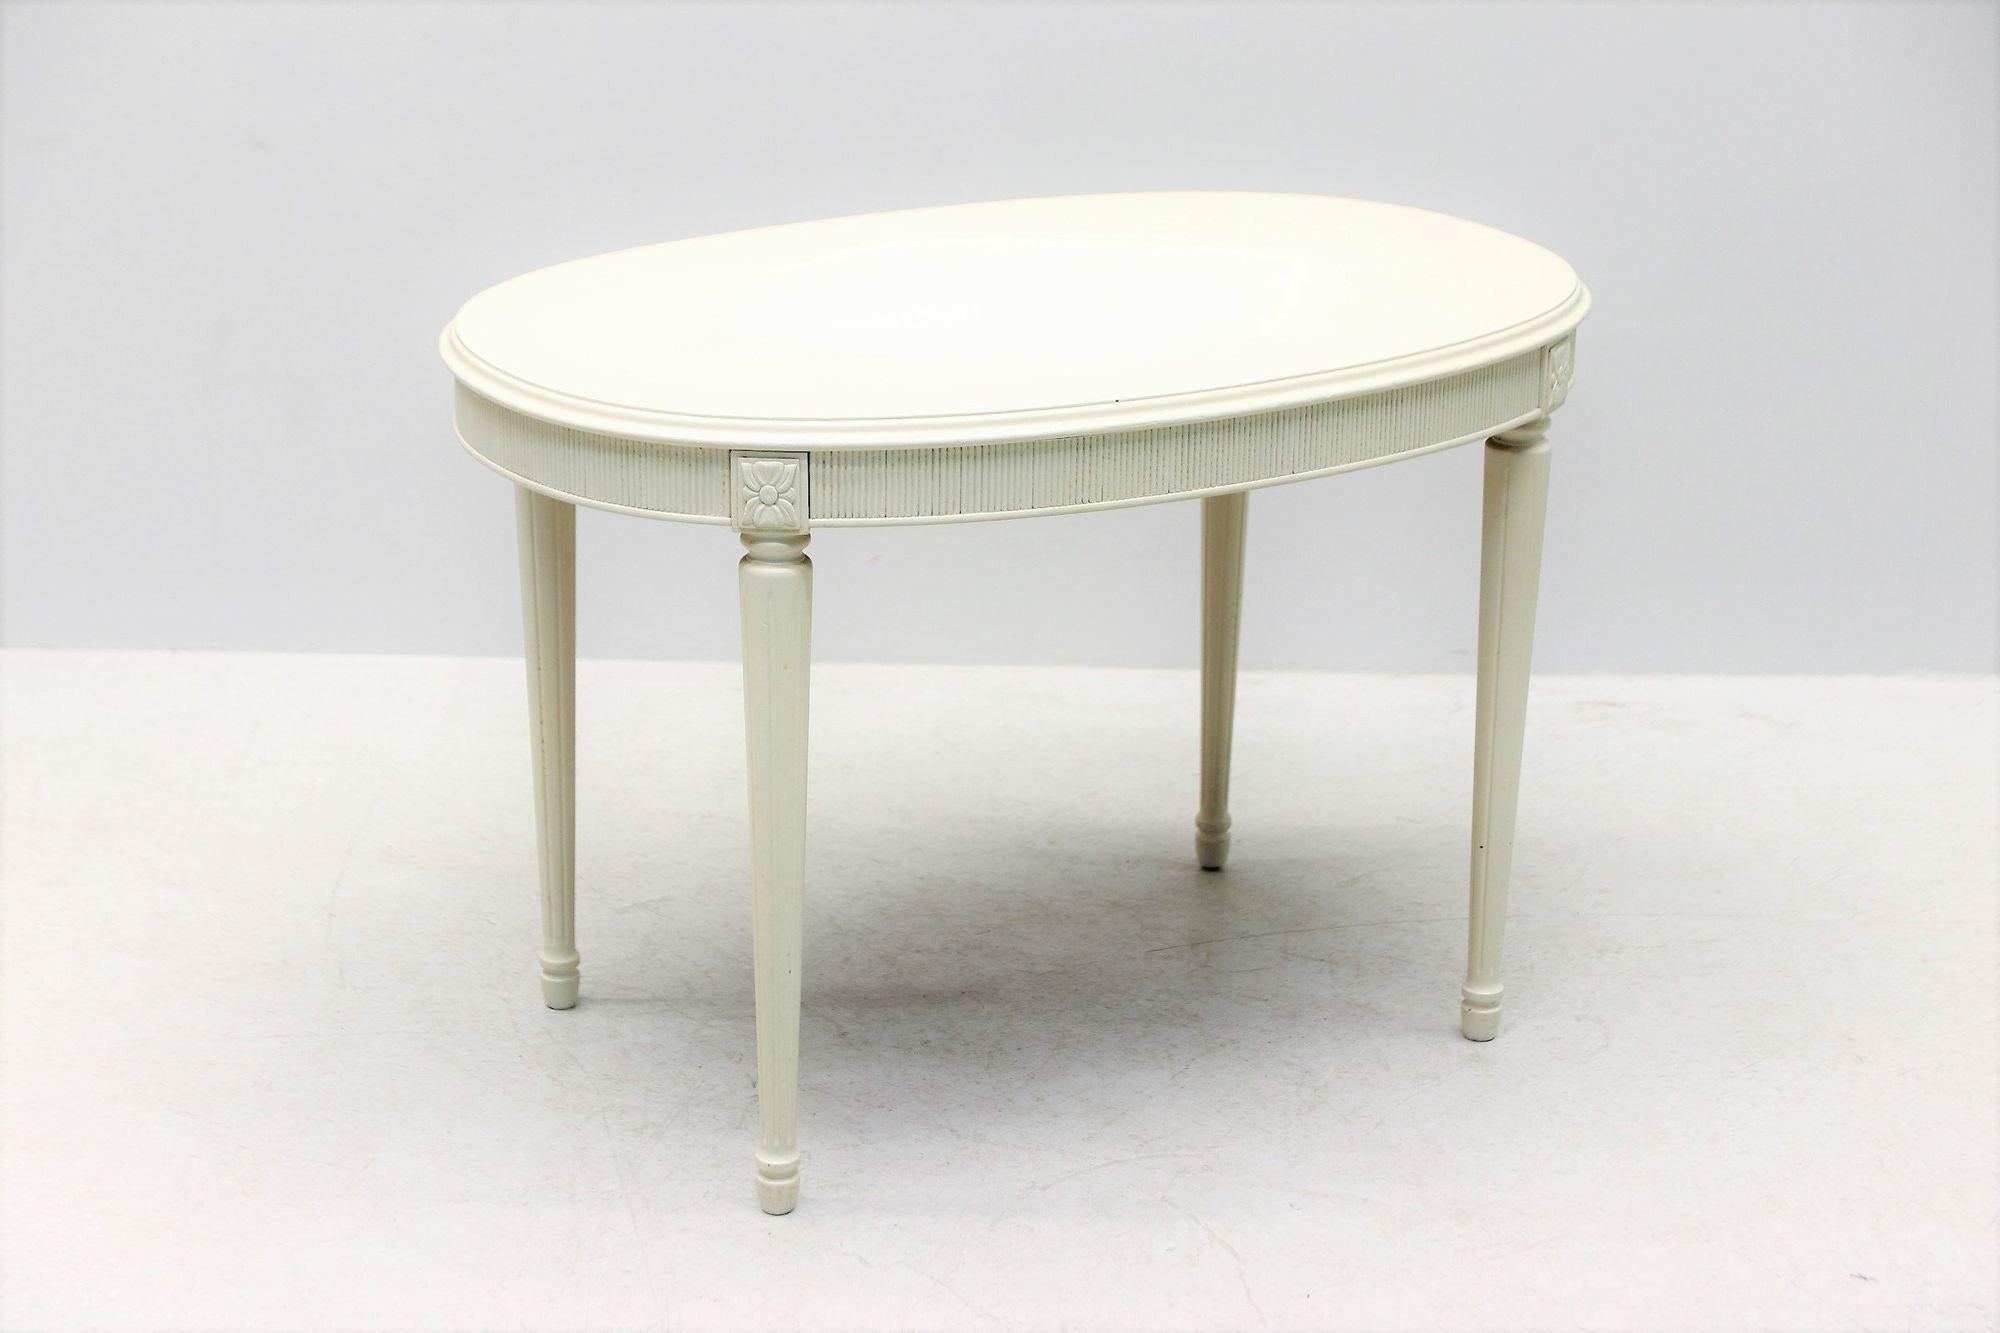 1900s White Painted Swedish Gustavian Style Salon Table In Good Condition For Sale In Memphis, TN